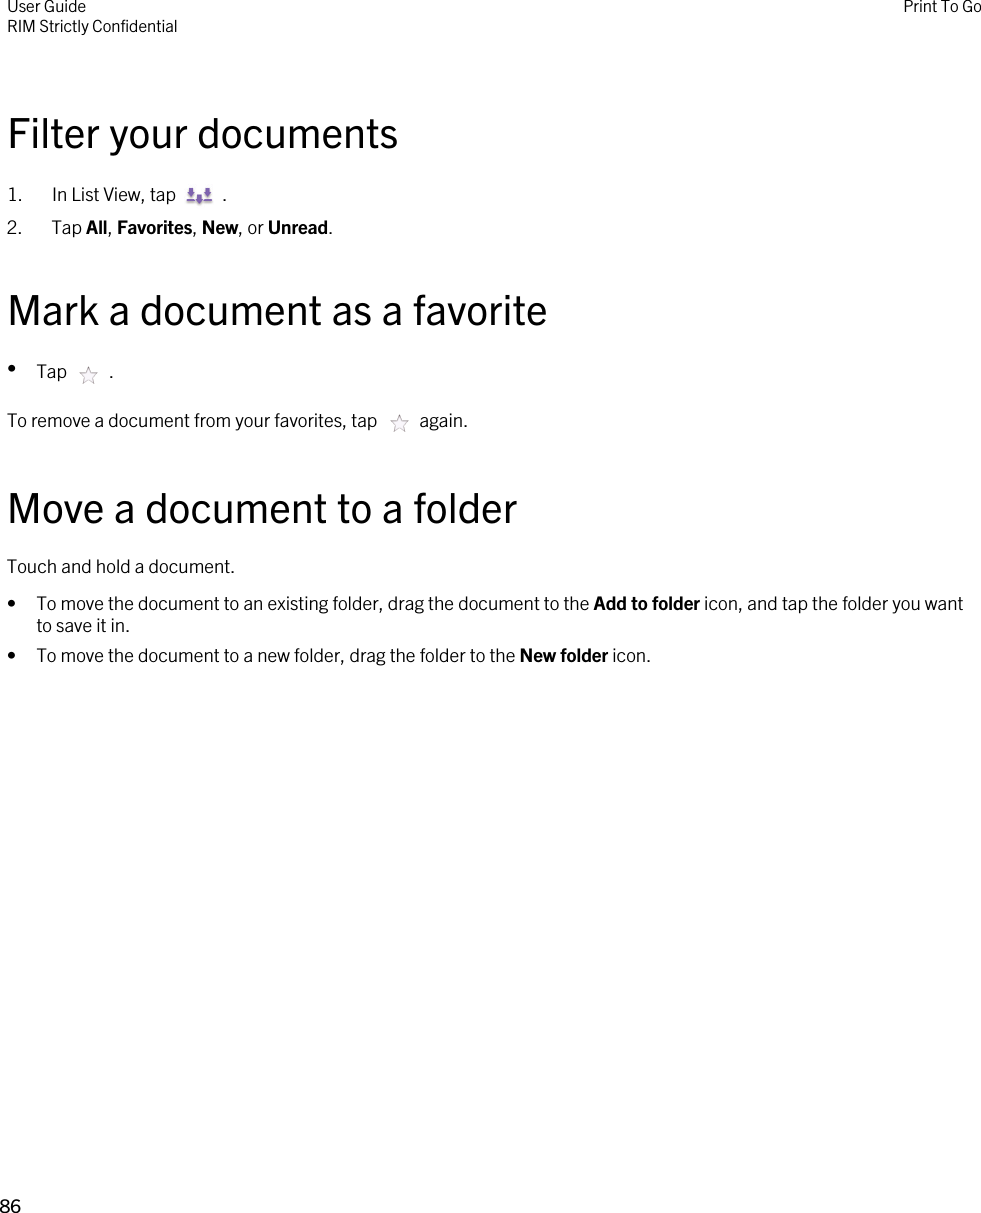 Filter your documents1.  In List View, tap    . 2. Tap All, Favorites, New, or Unread.Mark a document as a favorite•Tap    .To remove a document from your favorites, tap    again.Move a document to a folderTouch and hold a document.• To move the document to an existing folder, drag the document to the Add to folder icon, and tap the folder you want to save it in.• To move the document to a new folder, drag the folder to the New folder icon.User GuideRIM Strictly ConfidentialPrint To Go86 